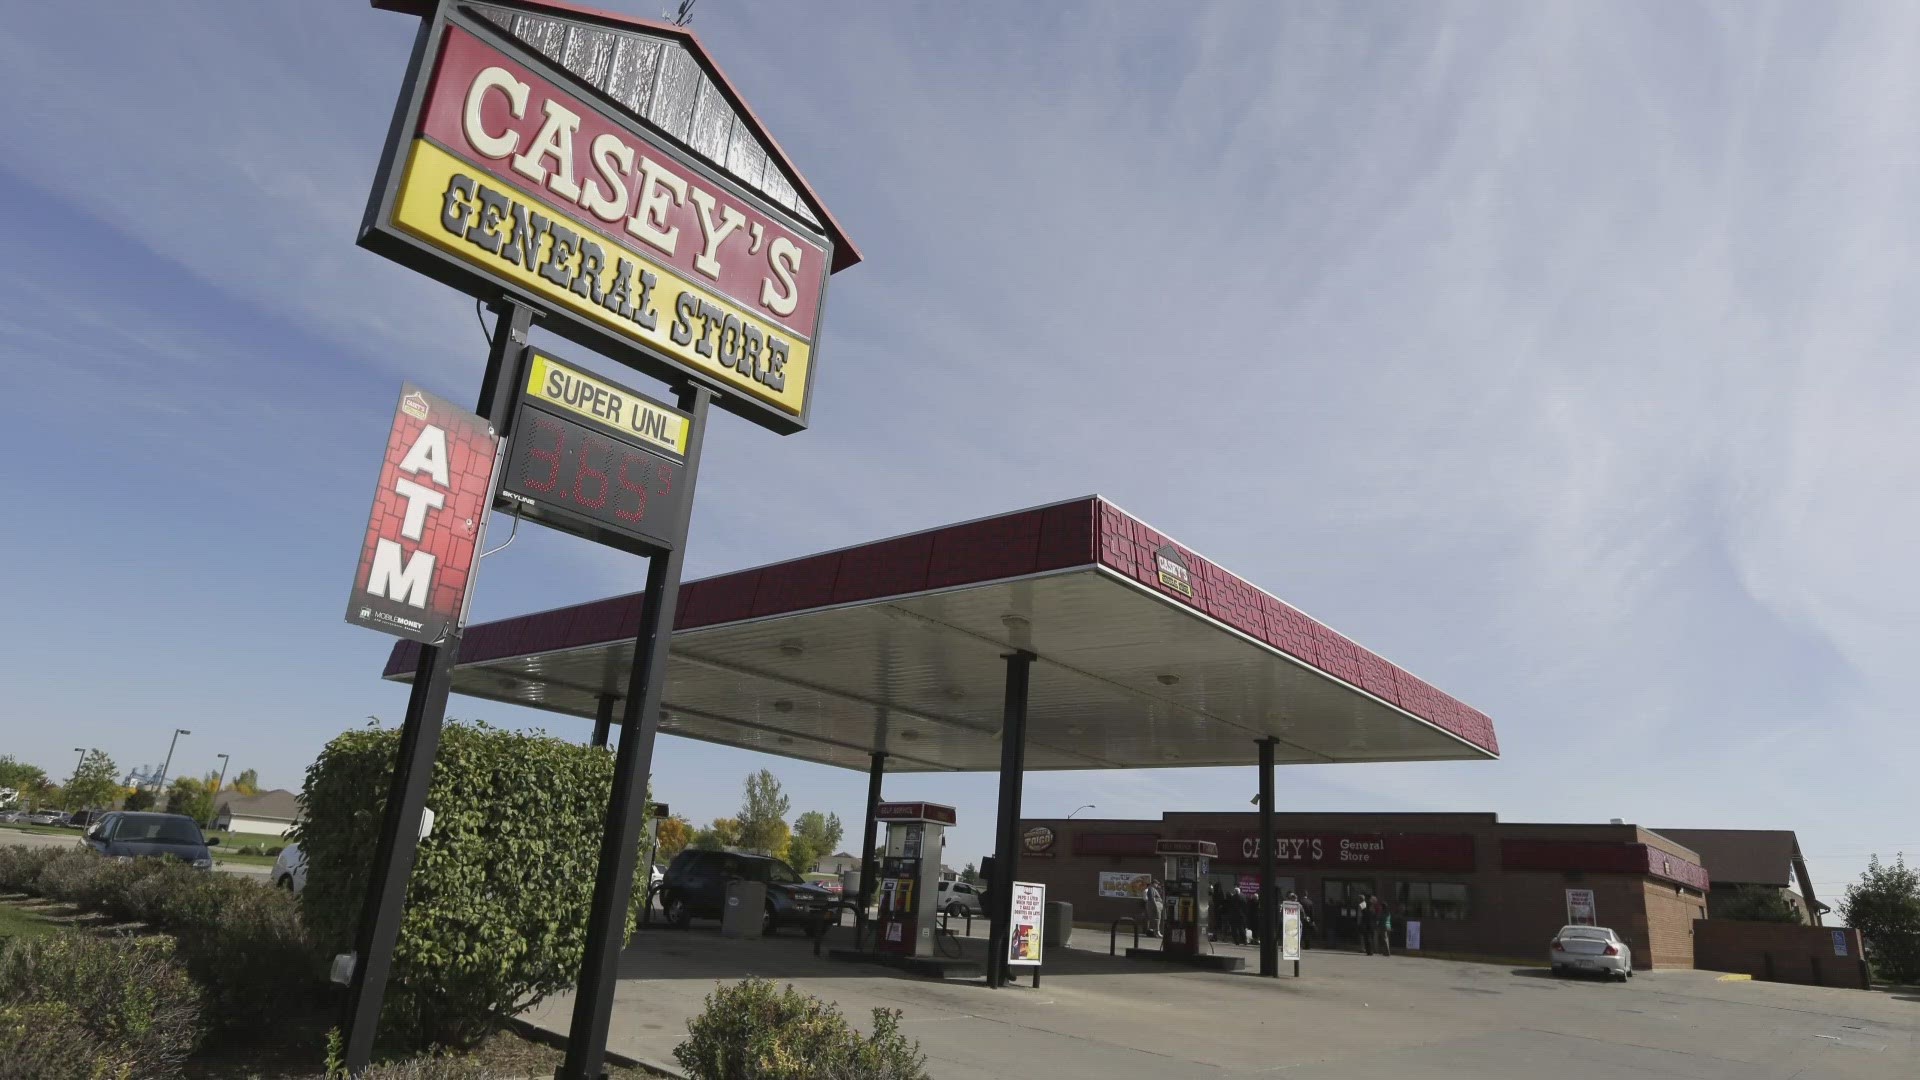 You may think it’s just another convenience store, but Casey’s also claims it's the fifth-largest pizza chain in the U.S.